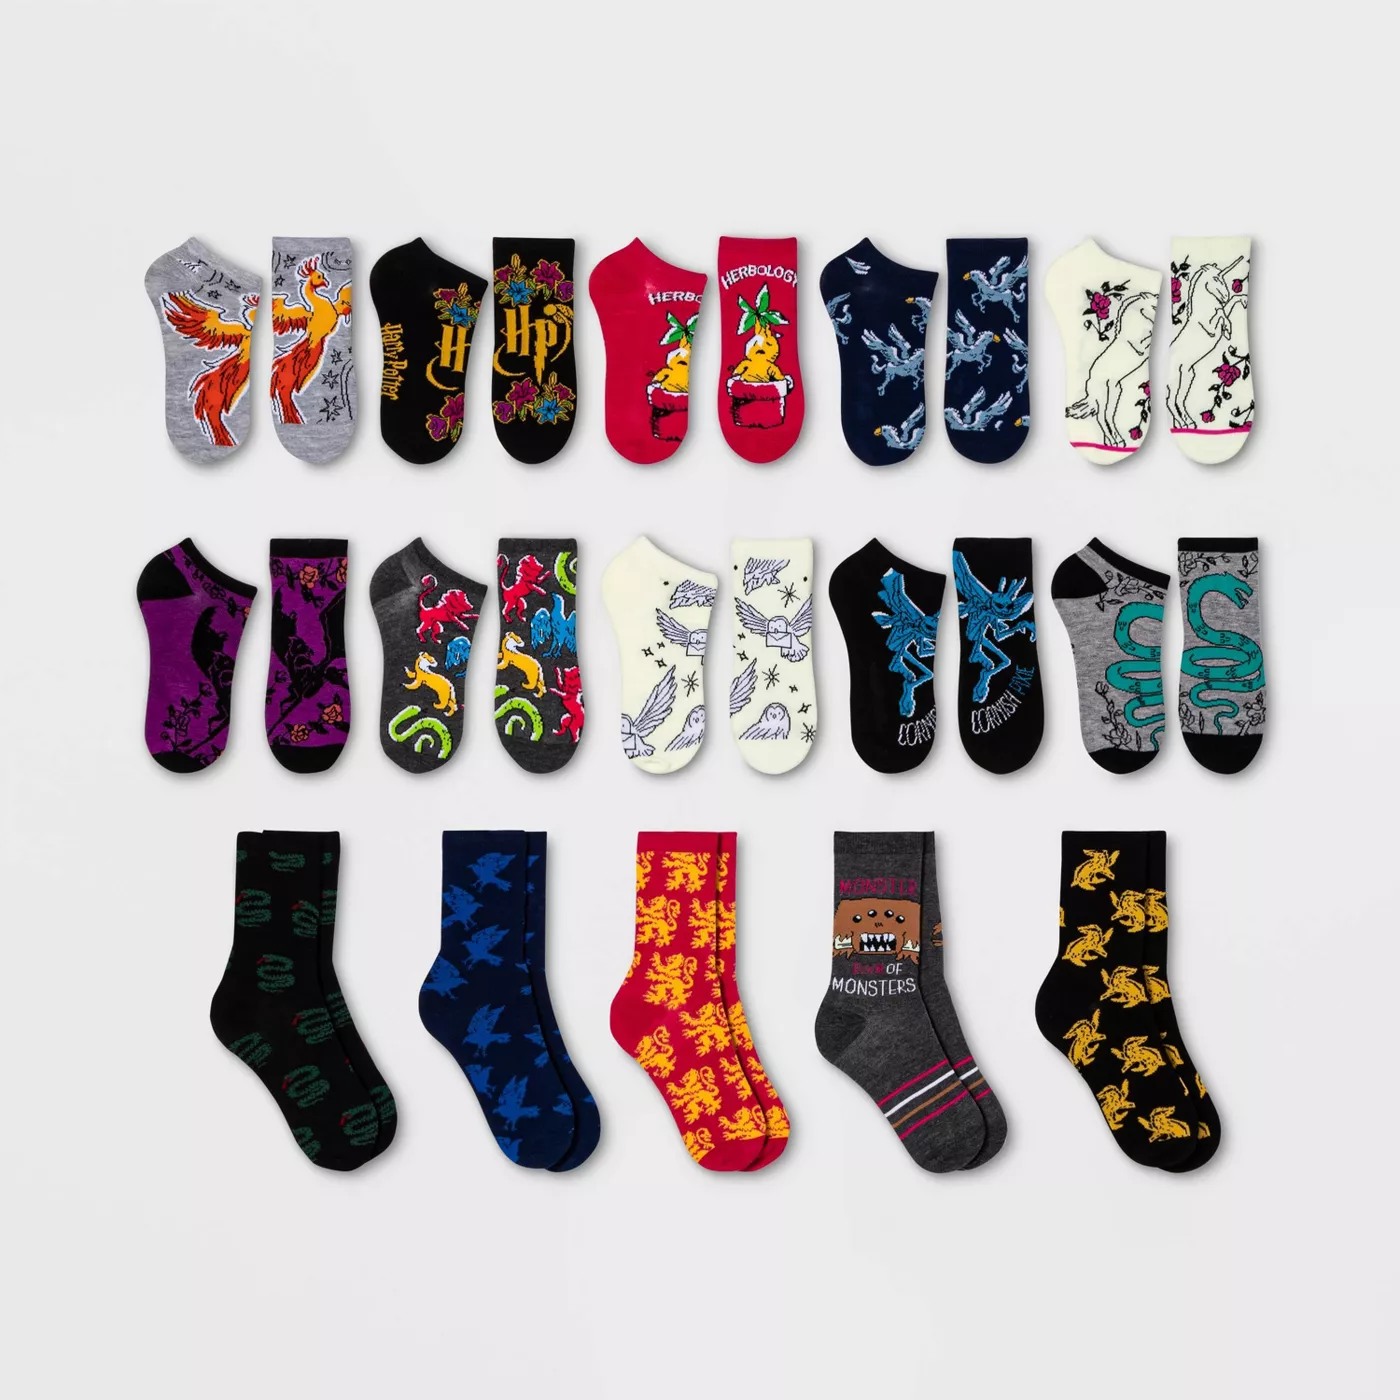 2020 Target Harry Potter Socks Advent Calendars Available Now! hello